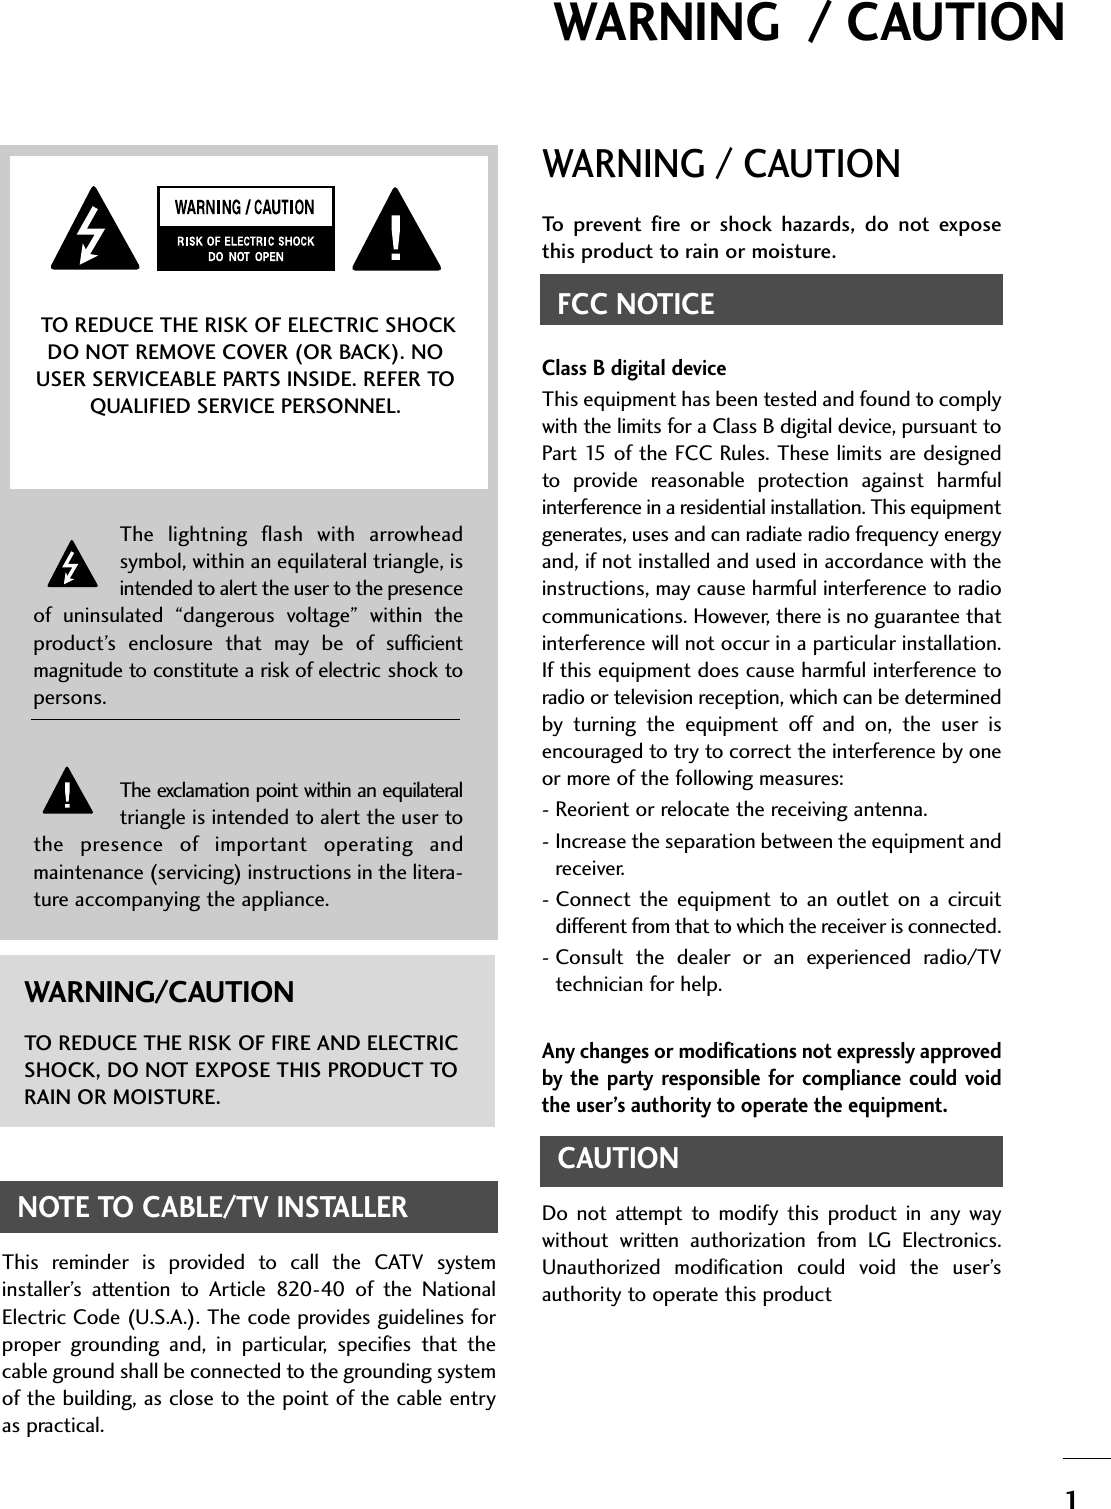 1WARNING  / CAUTIONWARNING / CAUTIONTo  prevent  fire  or  shock  hazards,  do  not  exposethis product to rain or moisture.FCC NOTICEClass B digital deviceThis equipment has been tested and found to complywith the limits for a Class B digital device, pursuant toPart 15 of  the  FCC  Rules. These limits are designedto  provide  reasonable  protection  against  harmfulinterference in a residential installation. This equipmentgenerates, uses and can radiate radio frequency energyand, if not installed and used in accordance with theinstructions, may cause harmful interference to radiocommunications. However, there is no guarantee thatinterference will not occur in a particular installation.If this equipment does cause harmful interference toradio or television reception, which can be determinedby  turning  the  equipment  off  and  on,  the  user  isencouraged to try to correct the interference by oneor more of the following measures:- Reorient or relocate the receiving antenna.- Increase the separation between the equipment andreceiver.- Connect  the  equipment  to  an  outlet on  a  circuitdifferent from that to which the receiver is connected.- Consult  the  dealer  or  an  experienced  radio/TVtechnician for help.Any changes or modifications not expressly approvedby  the  party  responsible  for  compliance  could  voidthe user’s authority to operate the equipment.CAUTIONDo  not  attempt  to  modify  this  product  in  any  waywithout  written  authorization  from  LG  Electronics.Unauthorized  modification  could  void  the  user’sauthority to operate this product The  lightning  flash  with  arrowheadsymbol, within an equilateral triangle, isintended to alert the user to the presenceof  uninsulated  “dangerous  voltage”  within  theproduct’s  enclosure  that  may  be  of  sufficientmagnitude to constitute a risk of electric shock topersons.The exclamation point within an equilateraltriangle is intended to alert the user tothe  presence  of  important  operating  andmaintenance (servicing) instructions in the litera-ture accompanying the appliance.TO REDUCE THE RISK OF ELECTRIC SHOCKDO NOT REMOVE COVER (OR BACK). NOUSER SERVICEABLE PARTS INSIDE. REFER TOQUALIFIED SERVICE PERSONNEL.WARNING/CAUTIONTO REDUCE THE RISK OF FIRE AND ELECTRICSHOCK, DO NOT EXPOSE THIS PRODUCT TORAIN OR MOISTURE.NOTE TO CABLE/TV INSTALLERThis  reminder  is  provided  to  call  the  CATV  systeminstaller’s  attention  to  Article  820-40  of  the  NationalElectric Code (U.S.A.). The code provides guidelines forproper  grounding  and,  in  particular,  specifies  that  thecable ground shall be connected to the grounding systemof the building, as close to the point of the cable entryas practical.